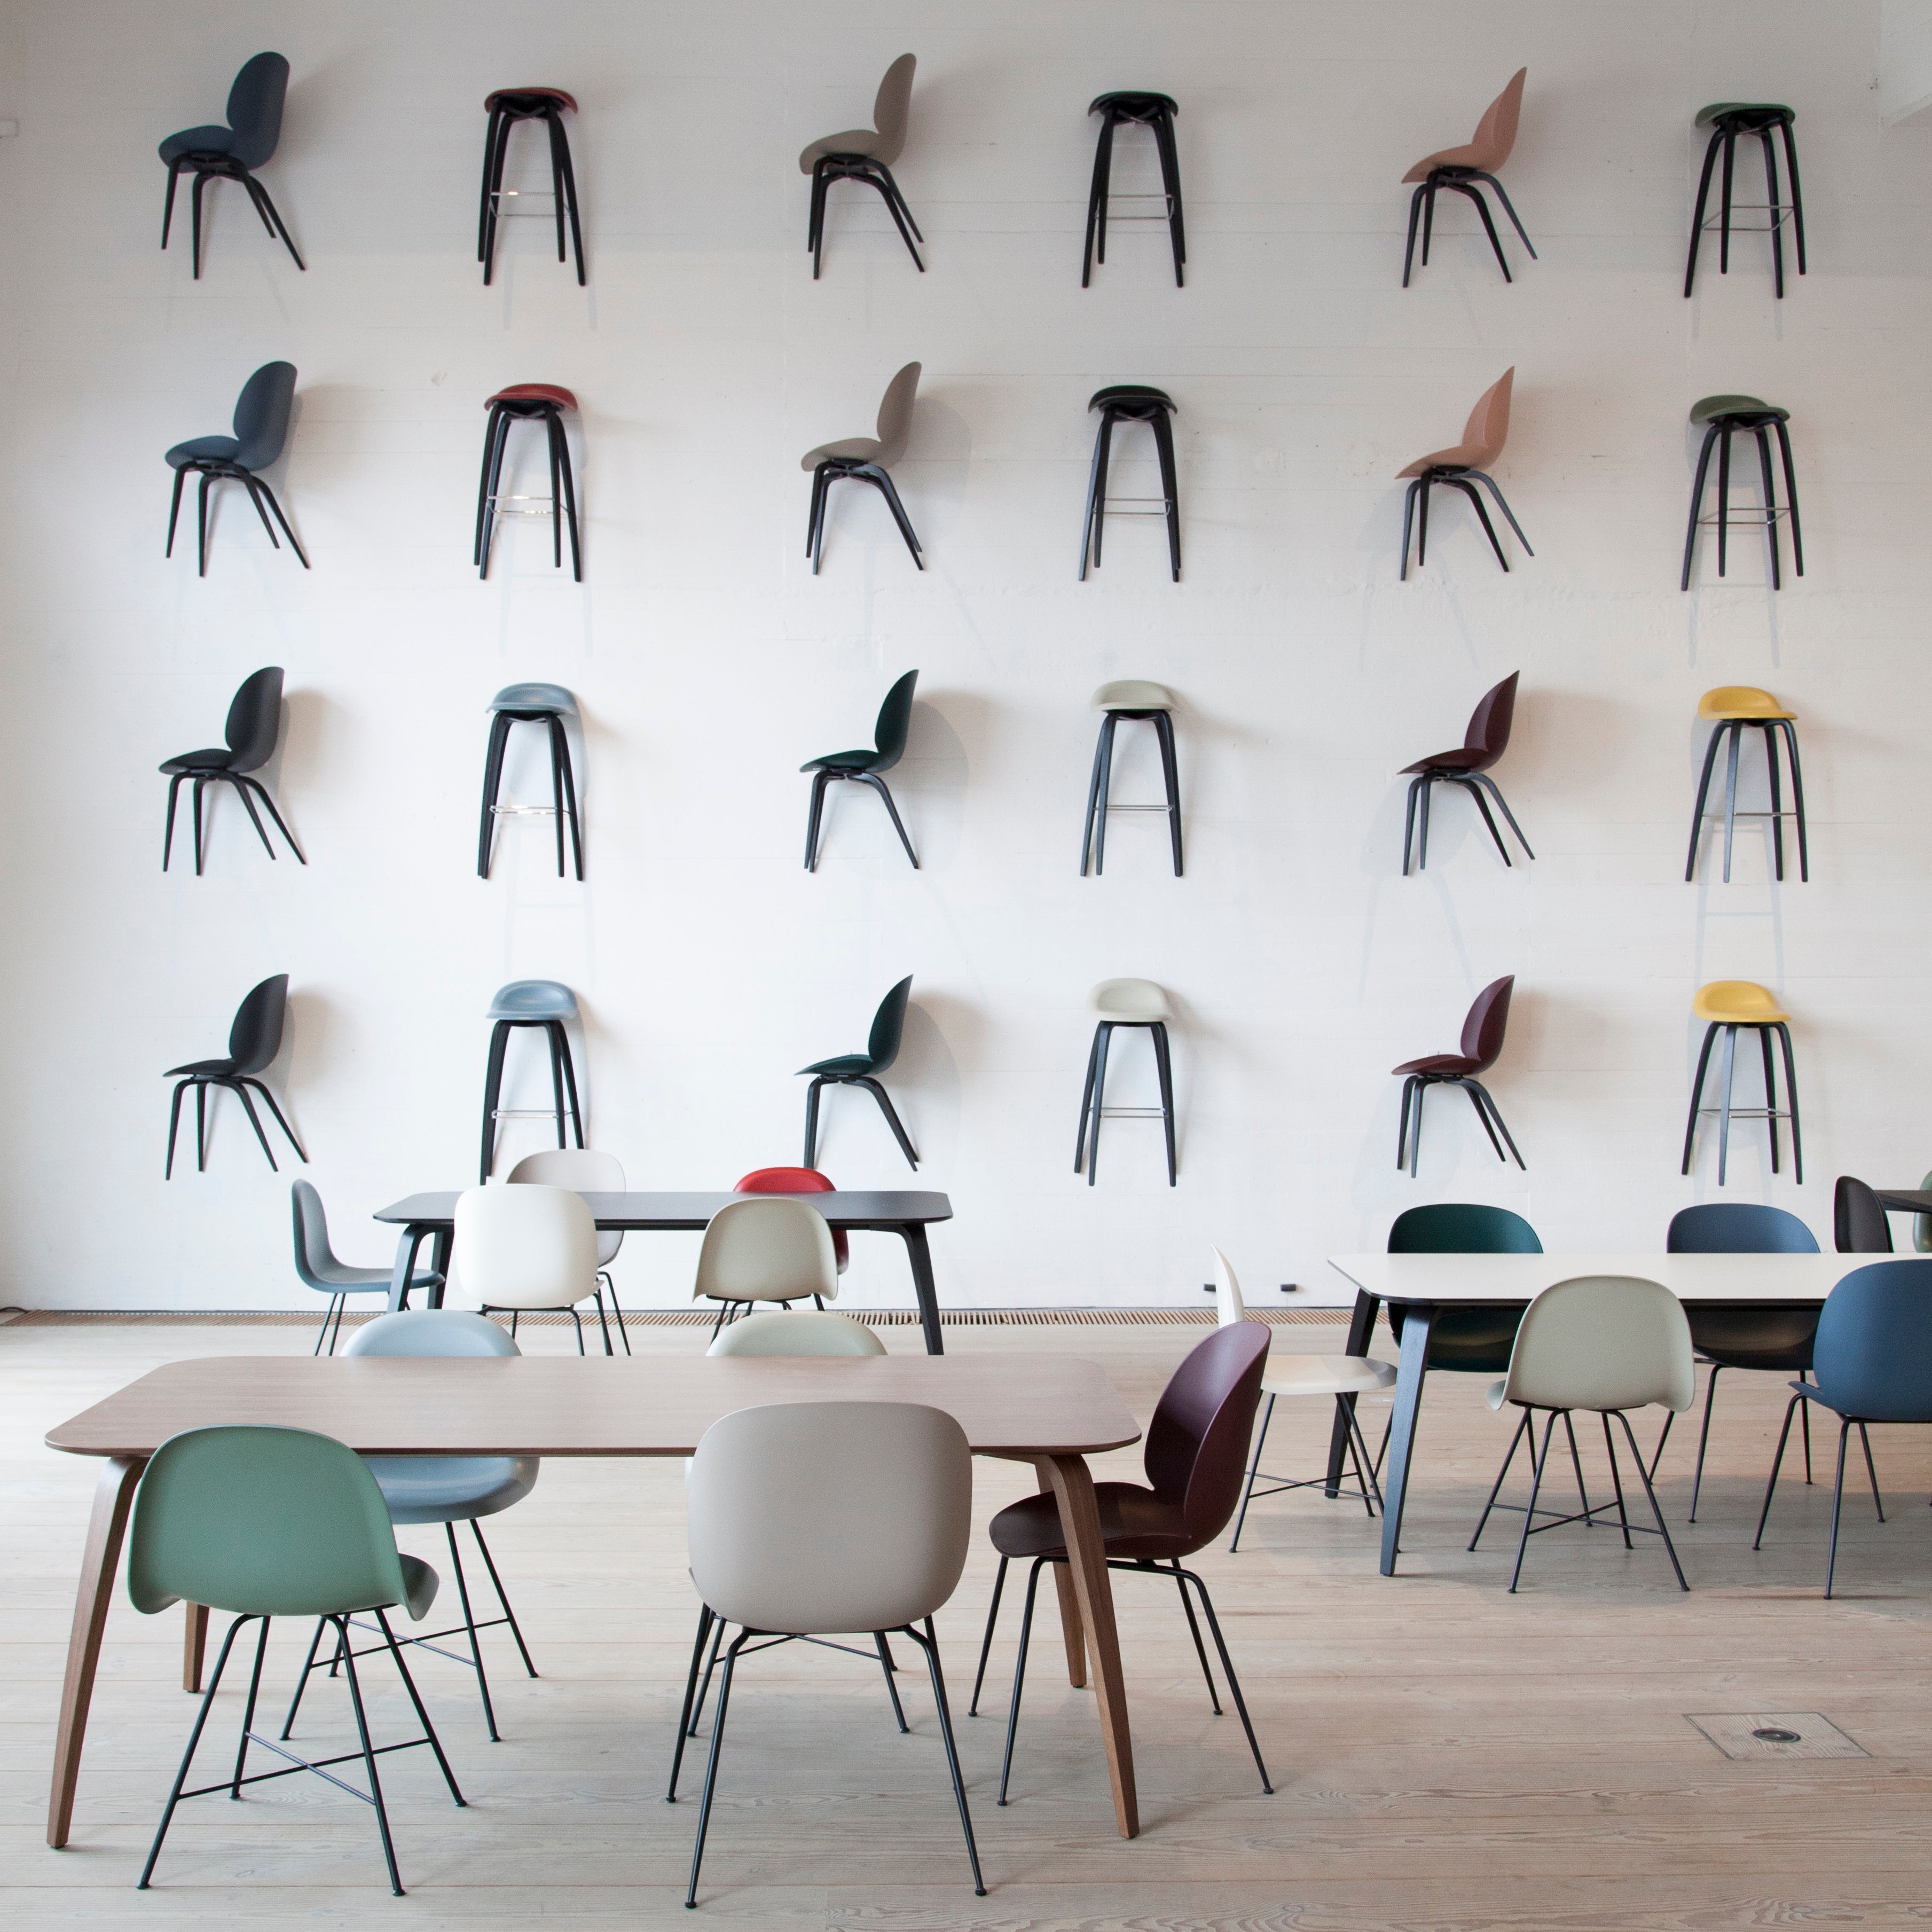 Beetle Dining Chair: Conic Base